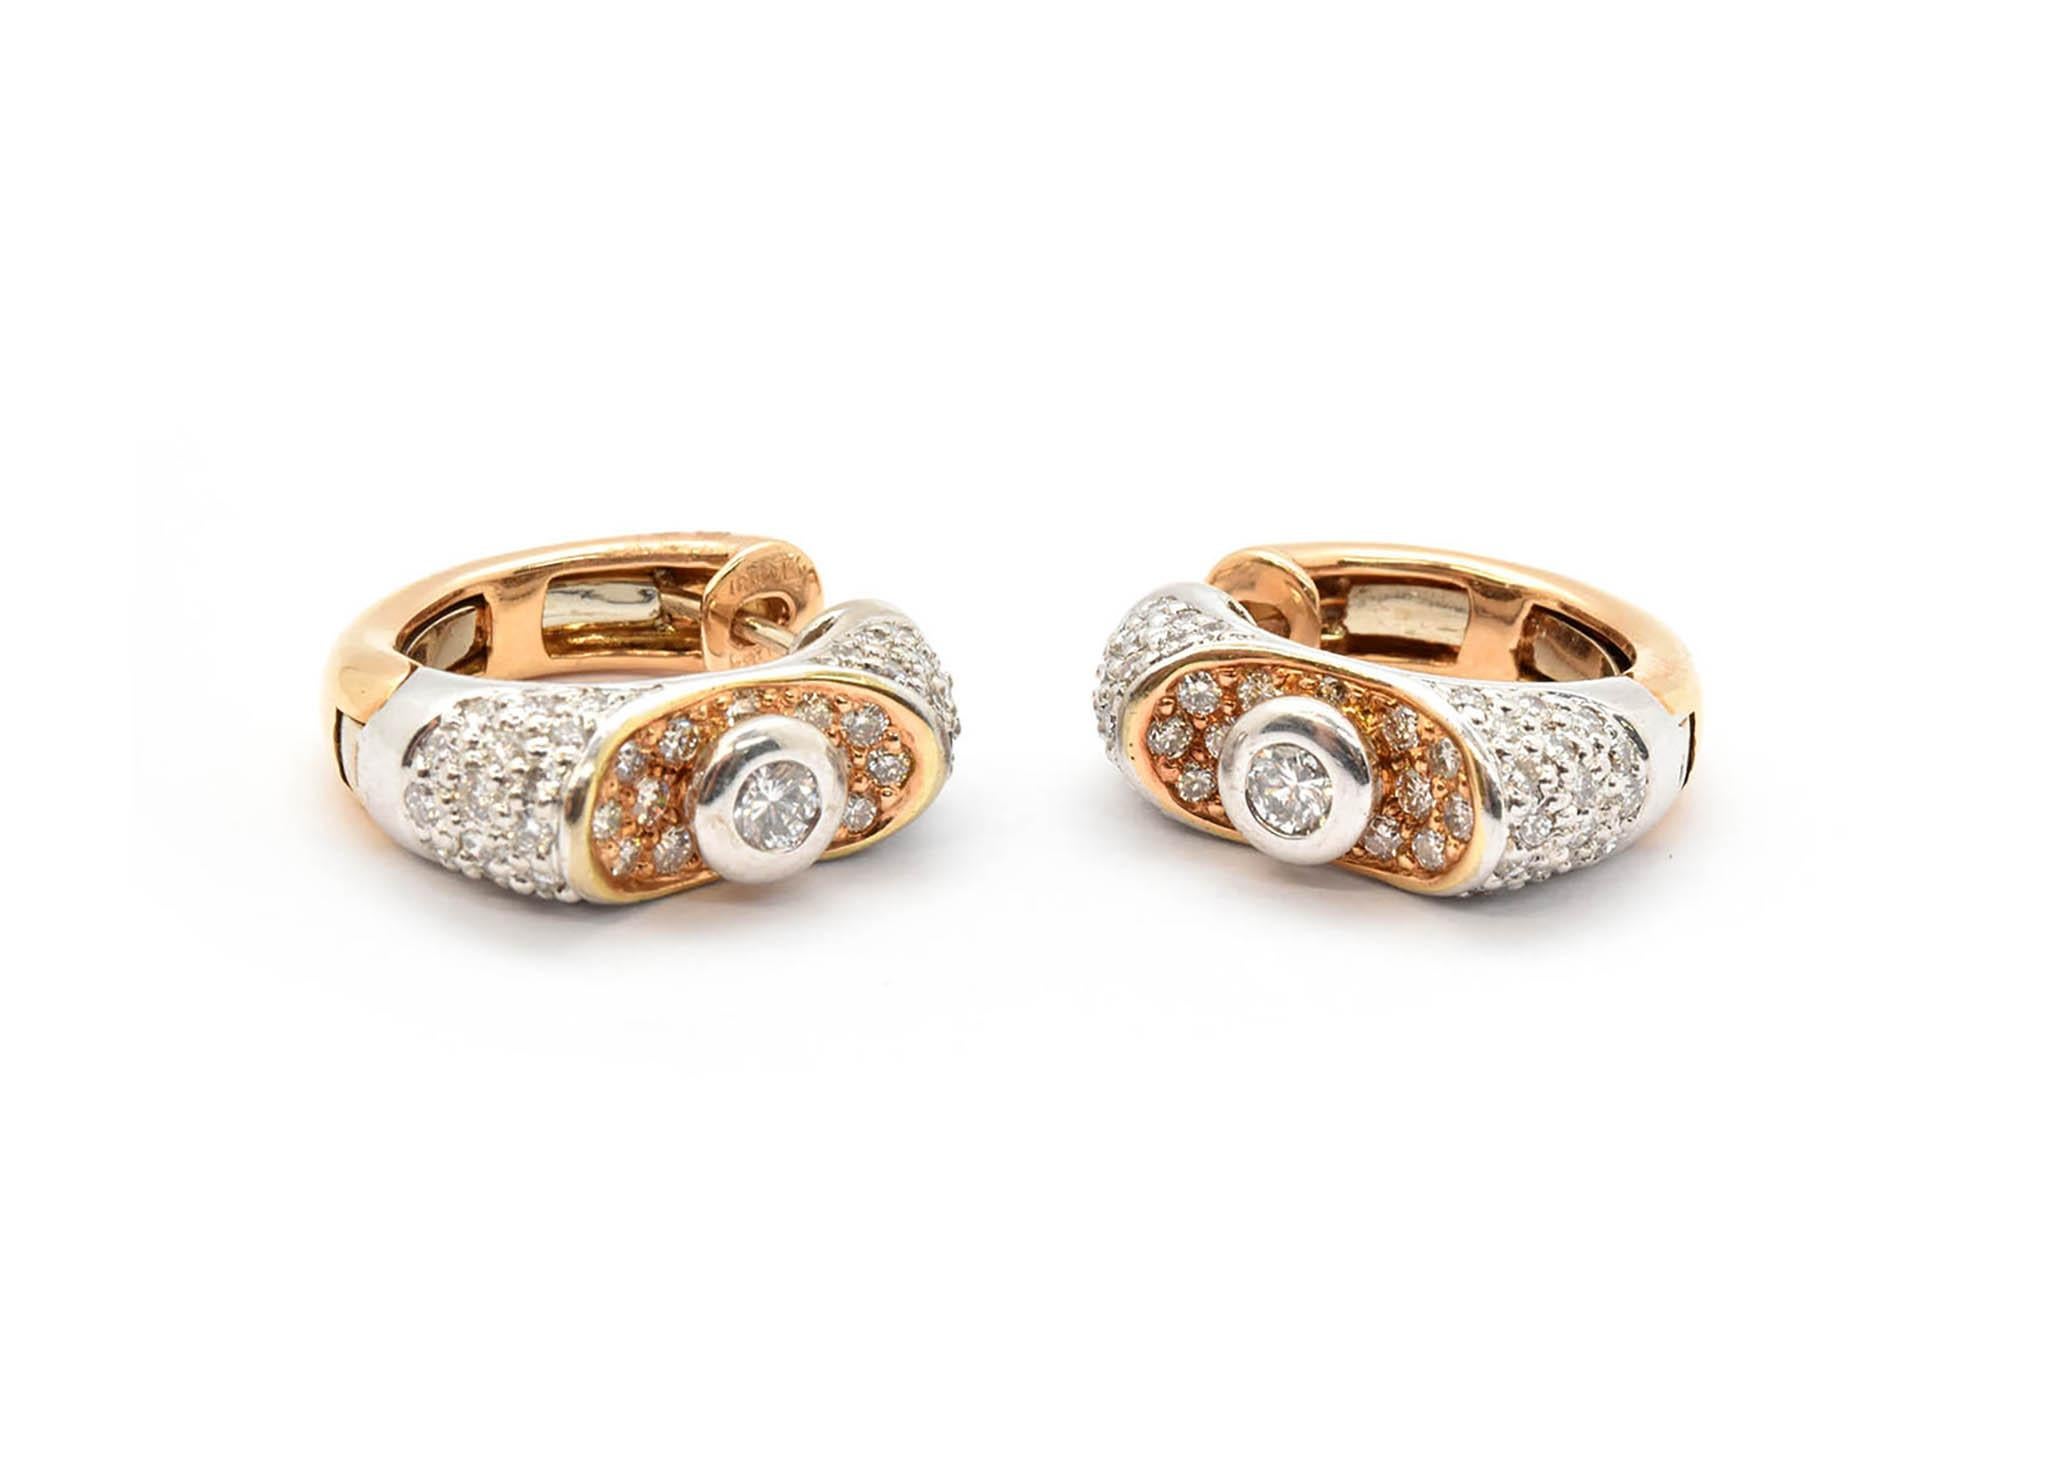 Designer: Lavin
Material: 18k white and rose gold
Center Diamonds: 2 round brilliant cut = .30cttw
Color: G-H
Clarity: VS-SI
Center Diamonds:  round brilliant cut = .90cttw
Color: G-H
Clarity: VS-SI
Dimensions: earrings are approximately 20mm in